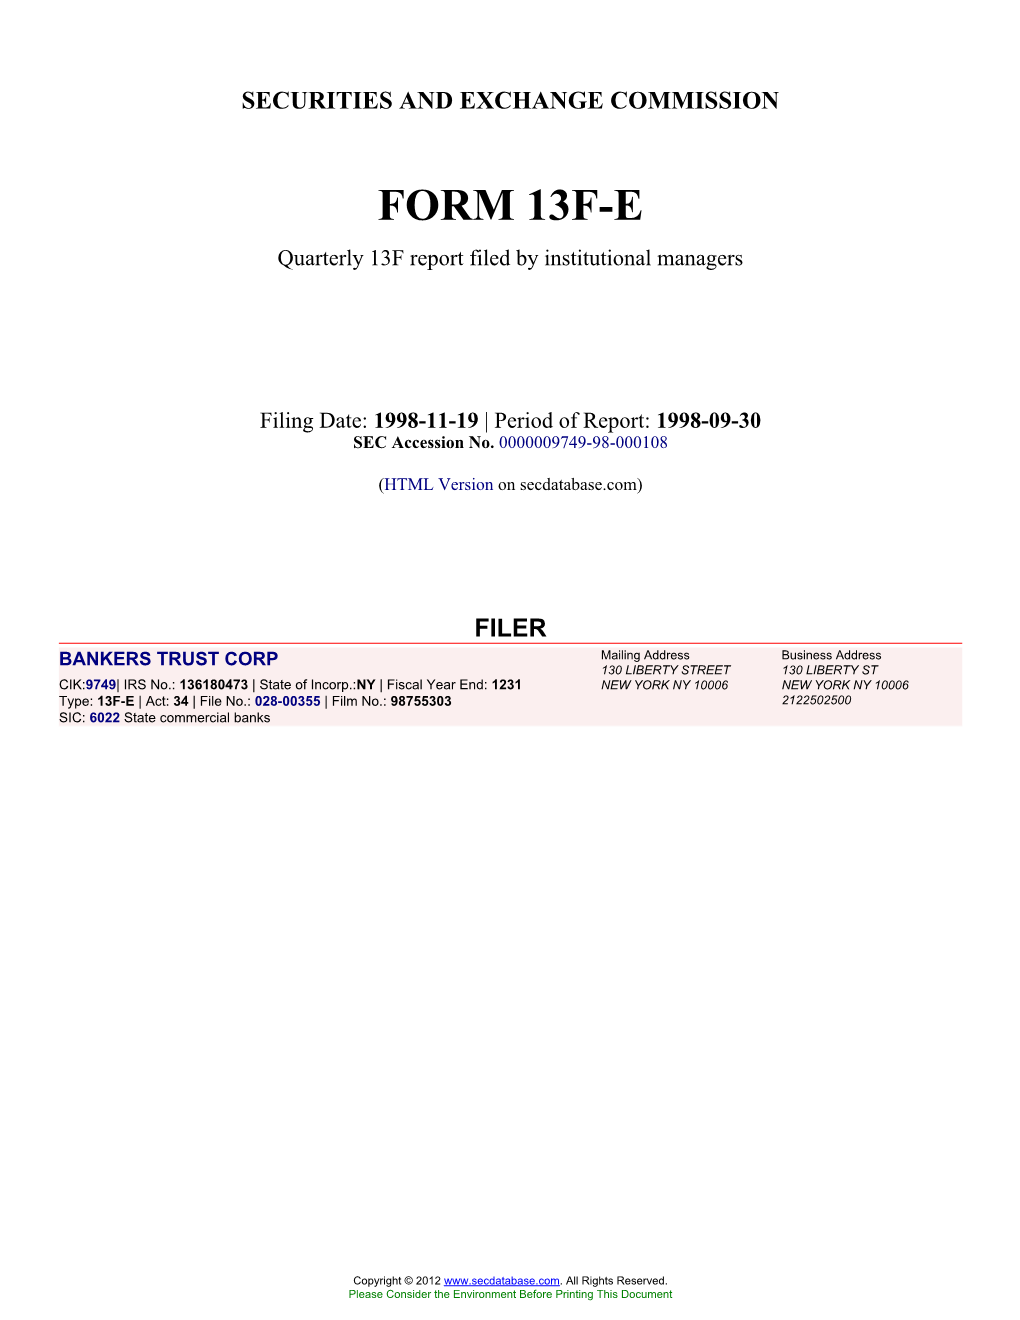 FORM 13F-E Quarterly 13F Report Filed by Institutional Managers